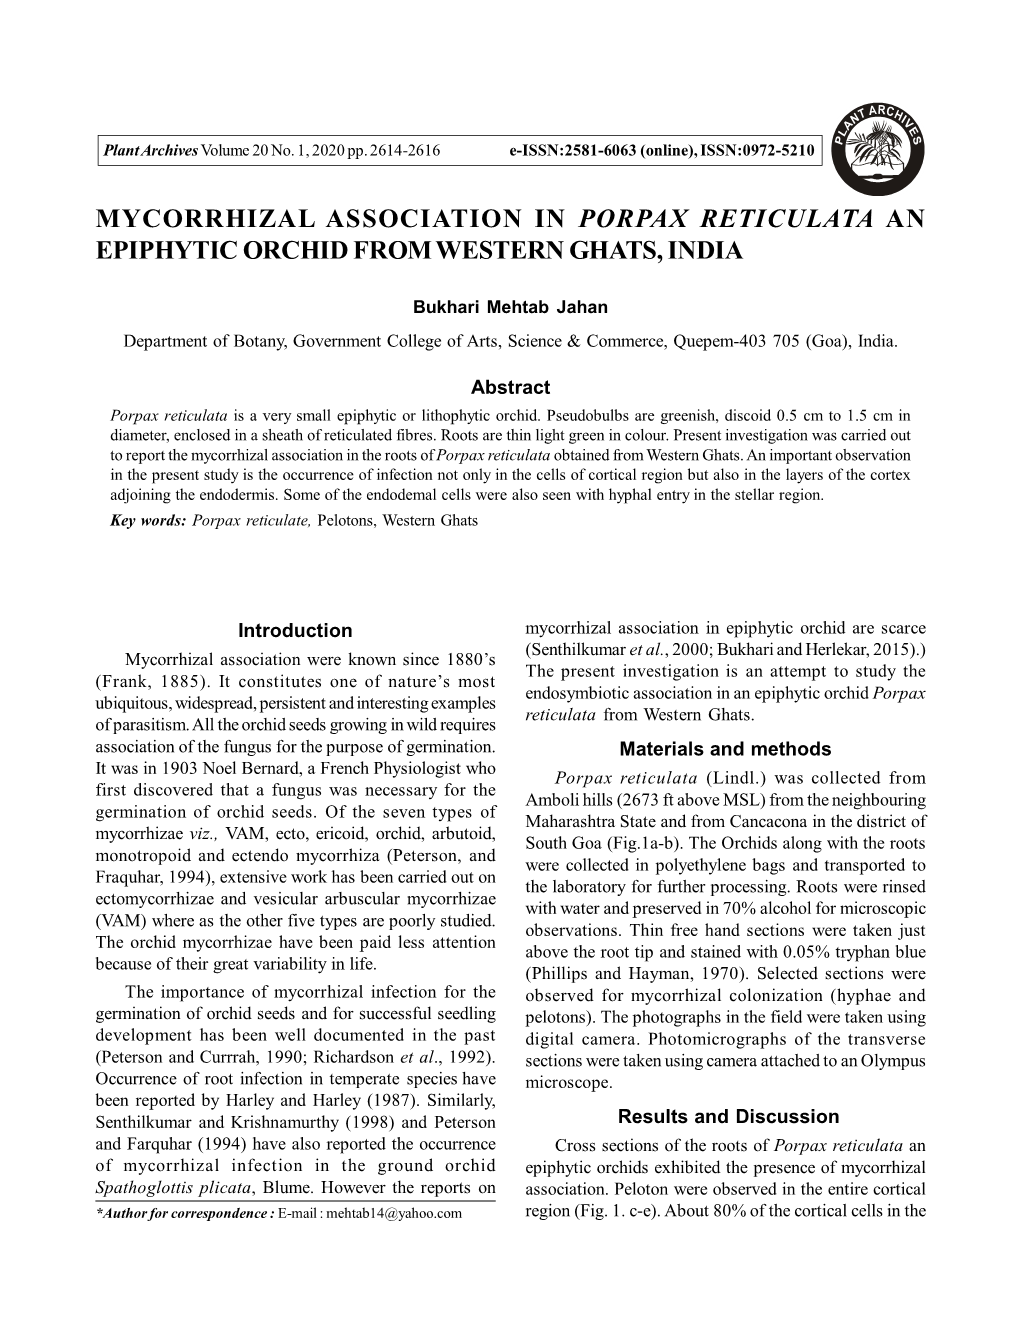 Mycorrhizal Association in Porpax Reticulata an Epiphytic Orchid from Western Ghats, India